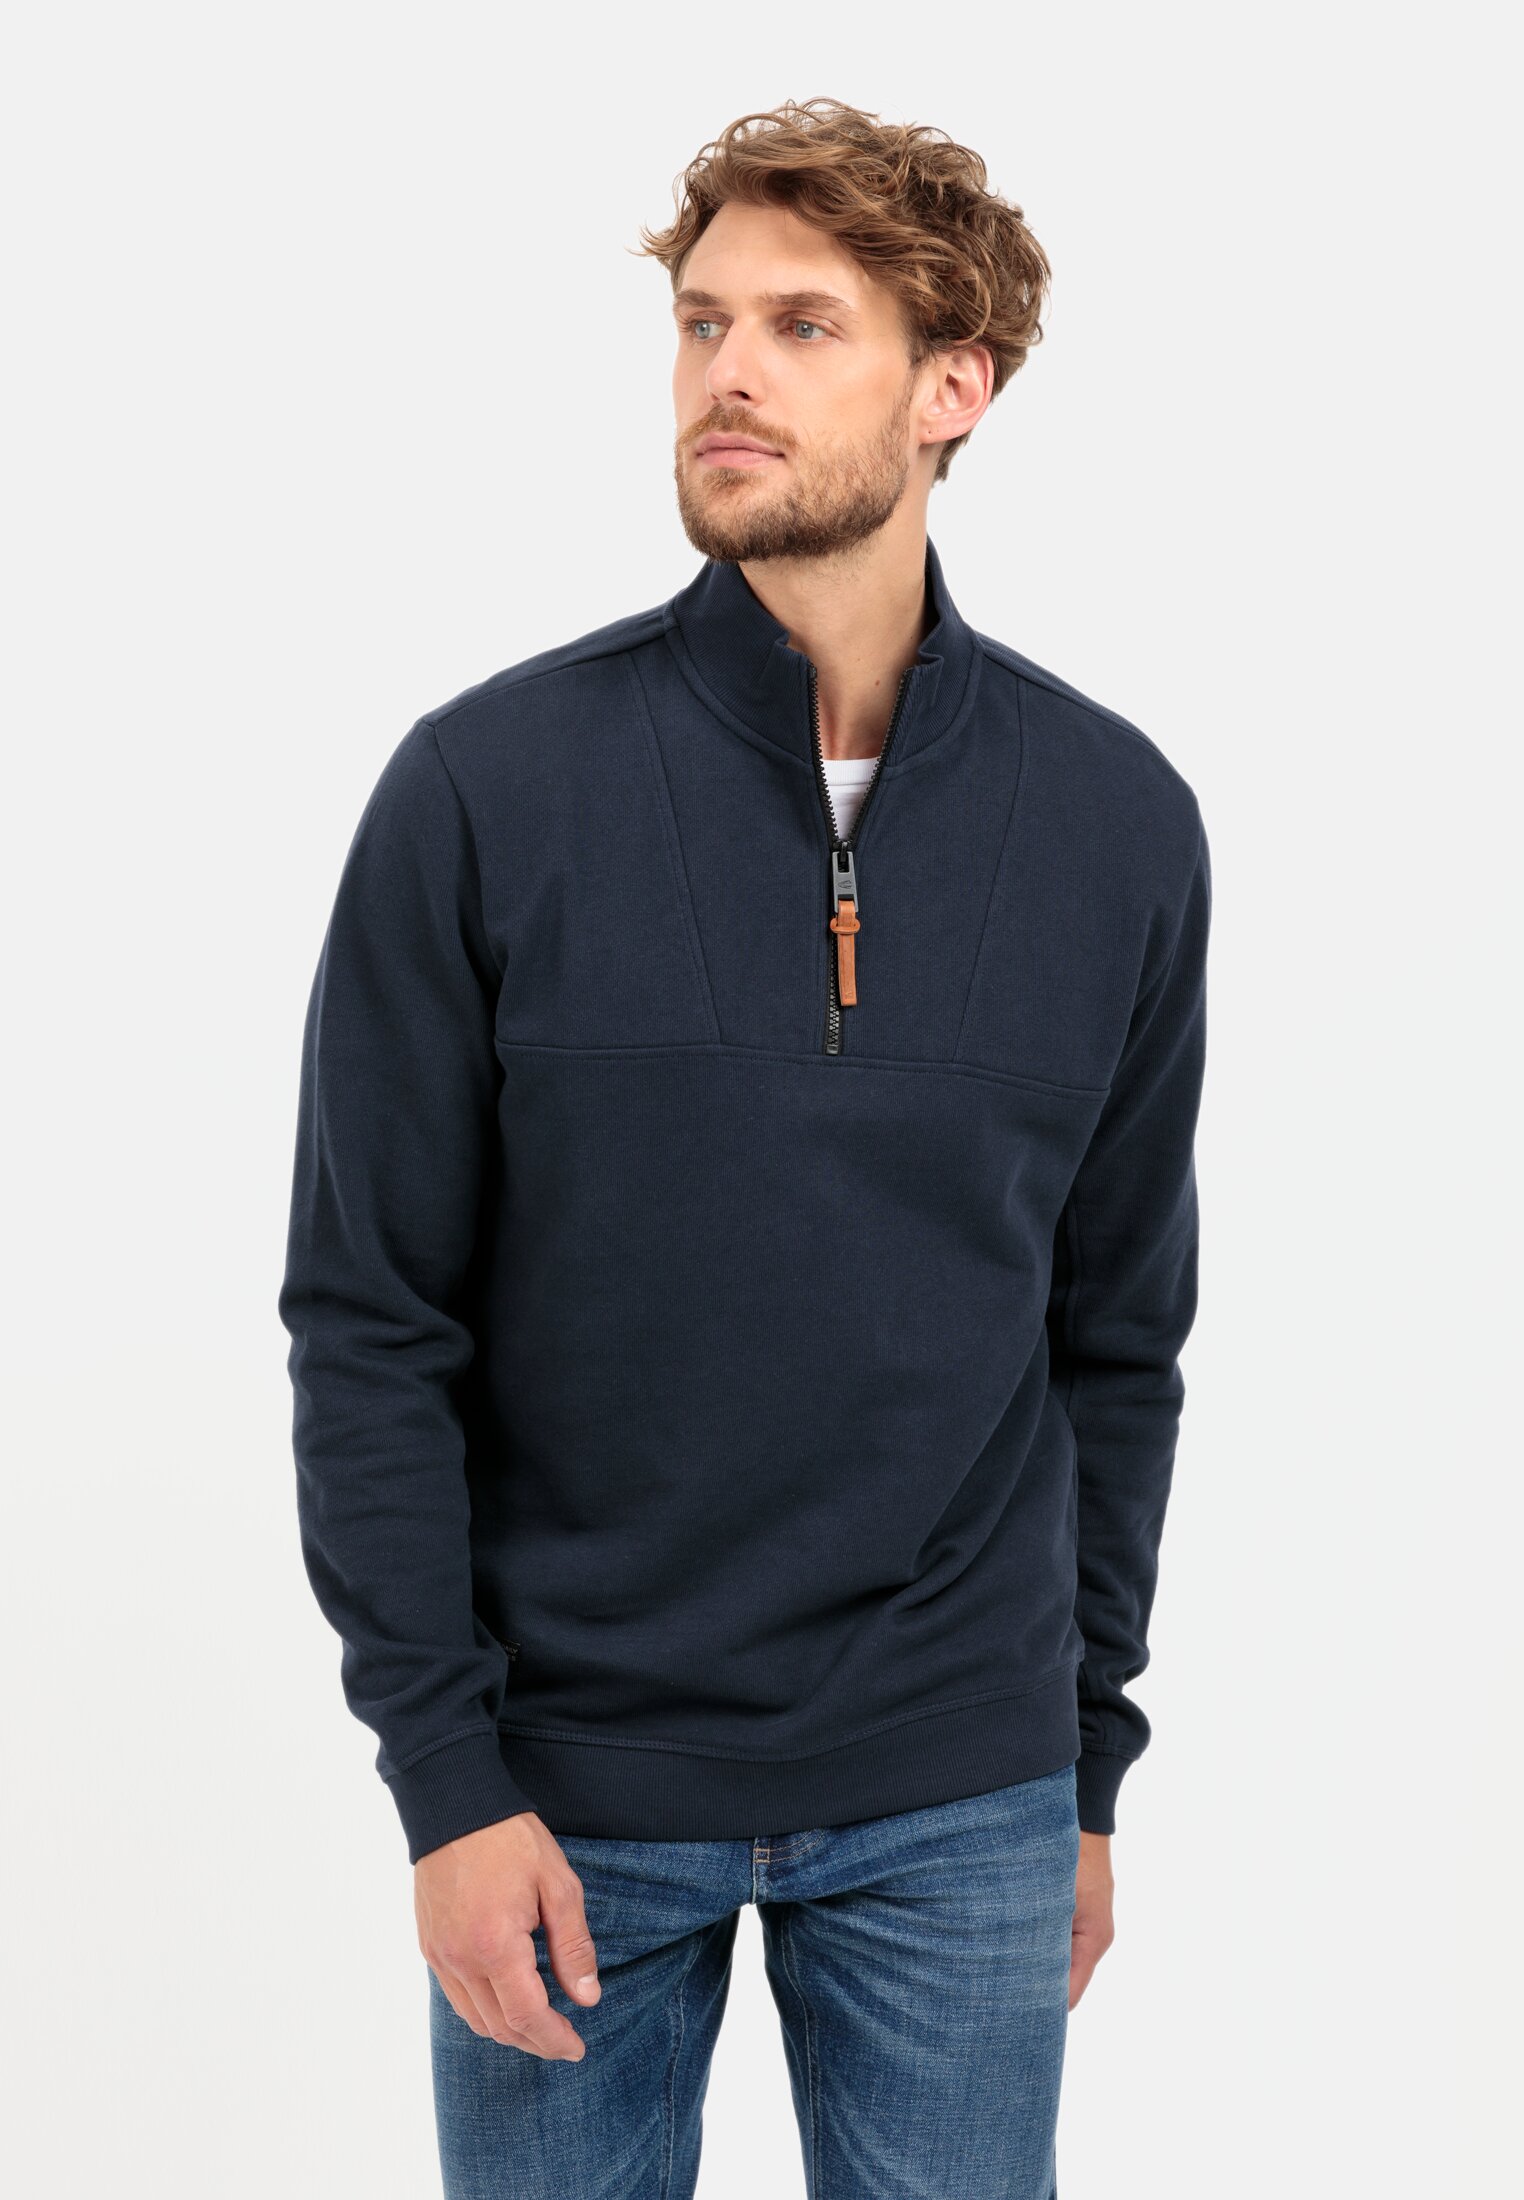 Camel Active Sweatshirt with stand-up collar